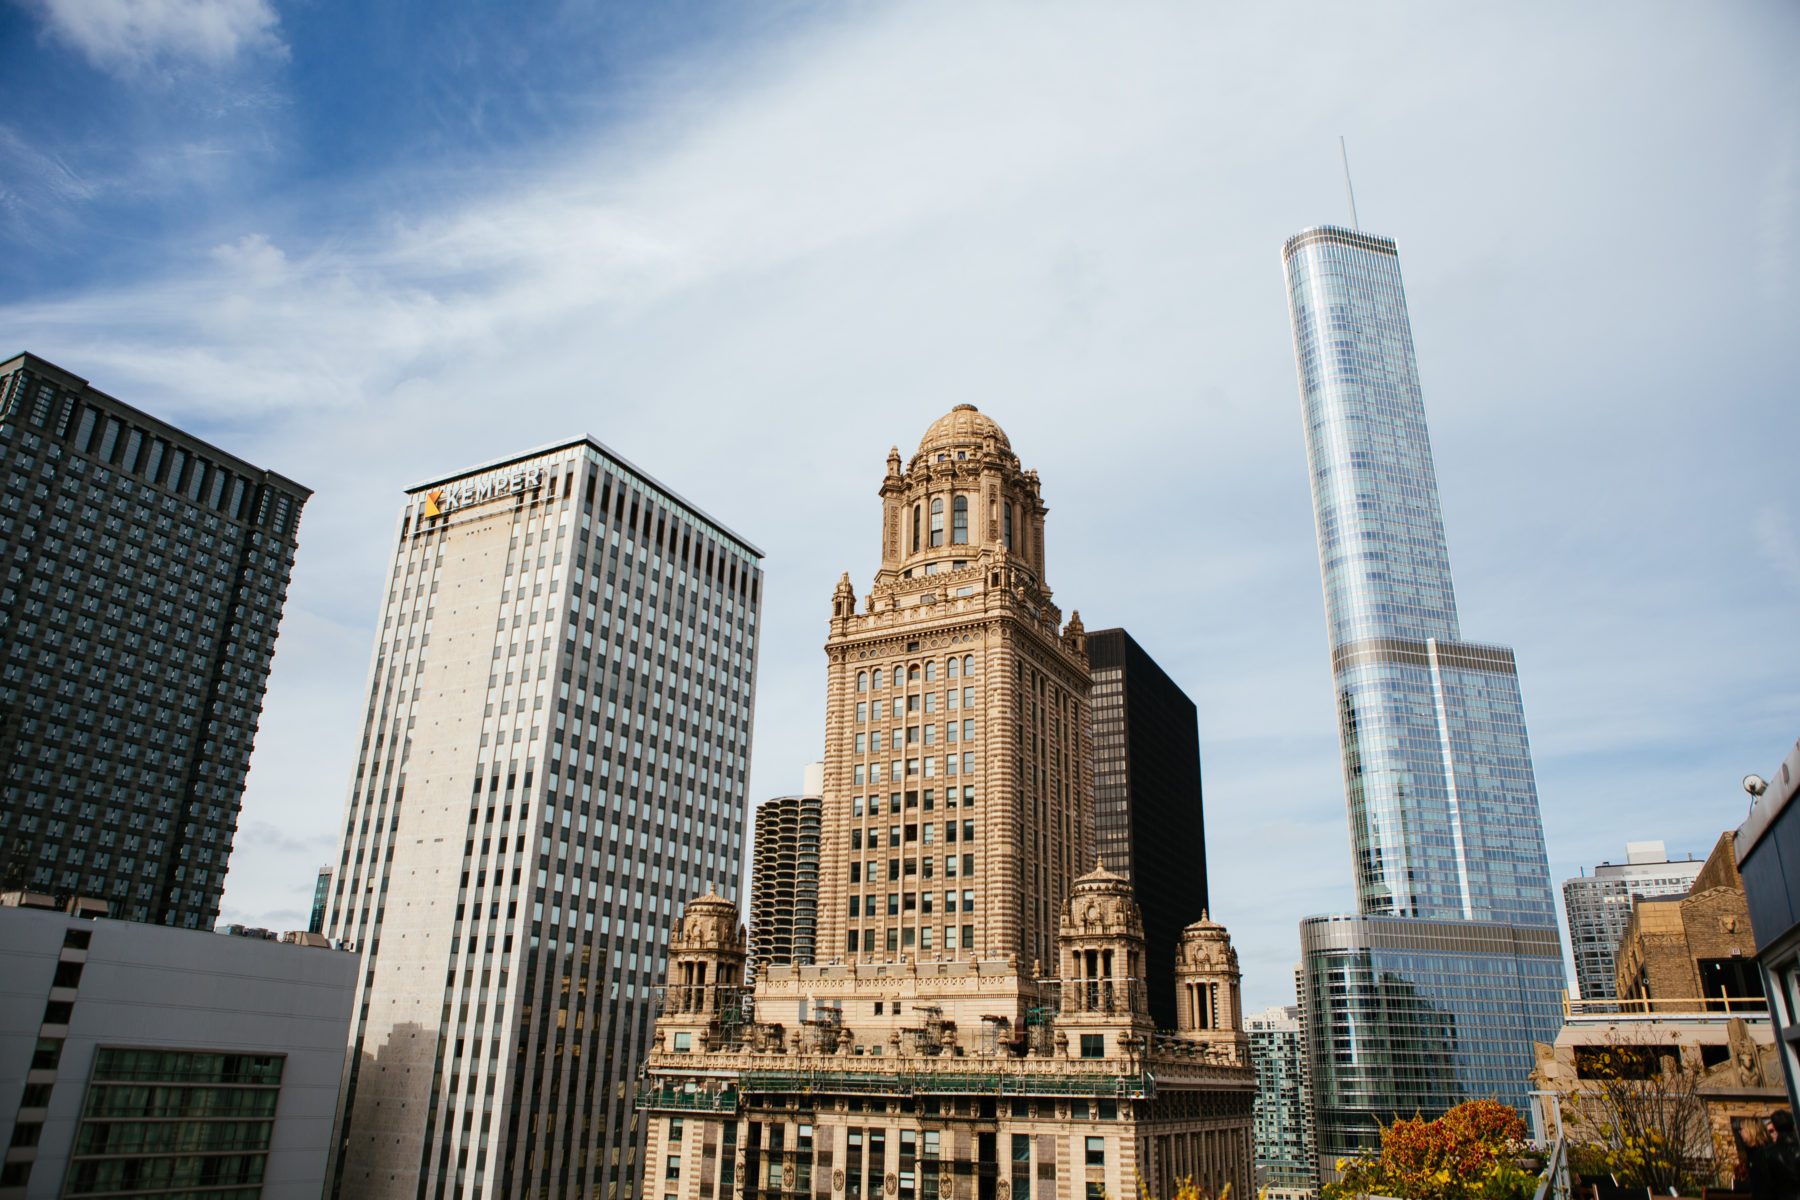 chicago architecture tour this weekend